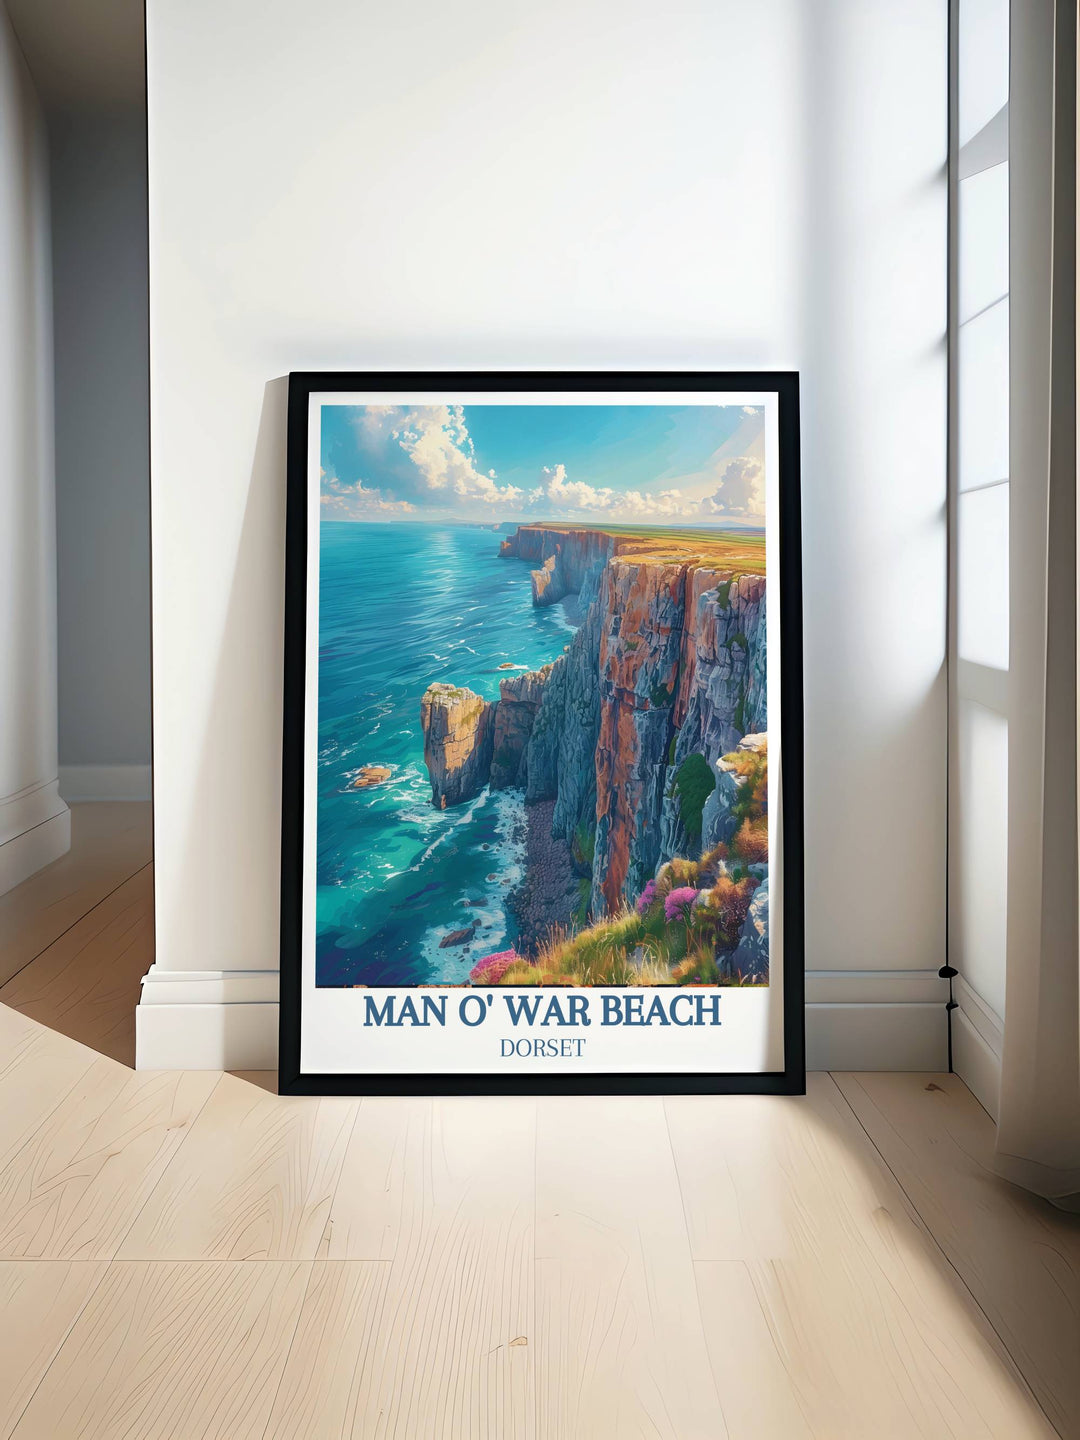 Durdle Door Arch and Jurassic Park Cliffs captured in stunning Dorset photography perfect for enhancing home decor with vintage travel prints and elegant wall art showcasing the natural beauty of Dorset ideal for gifts and interior design inspiration.